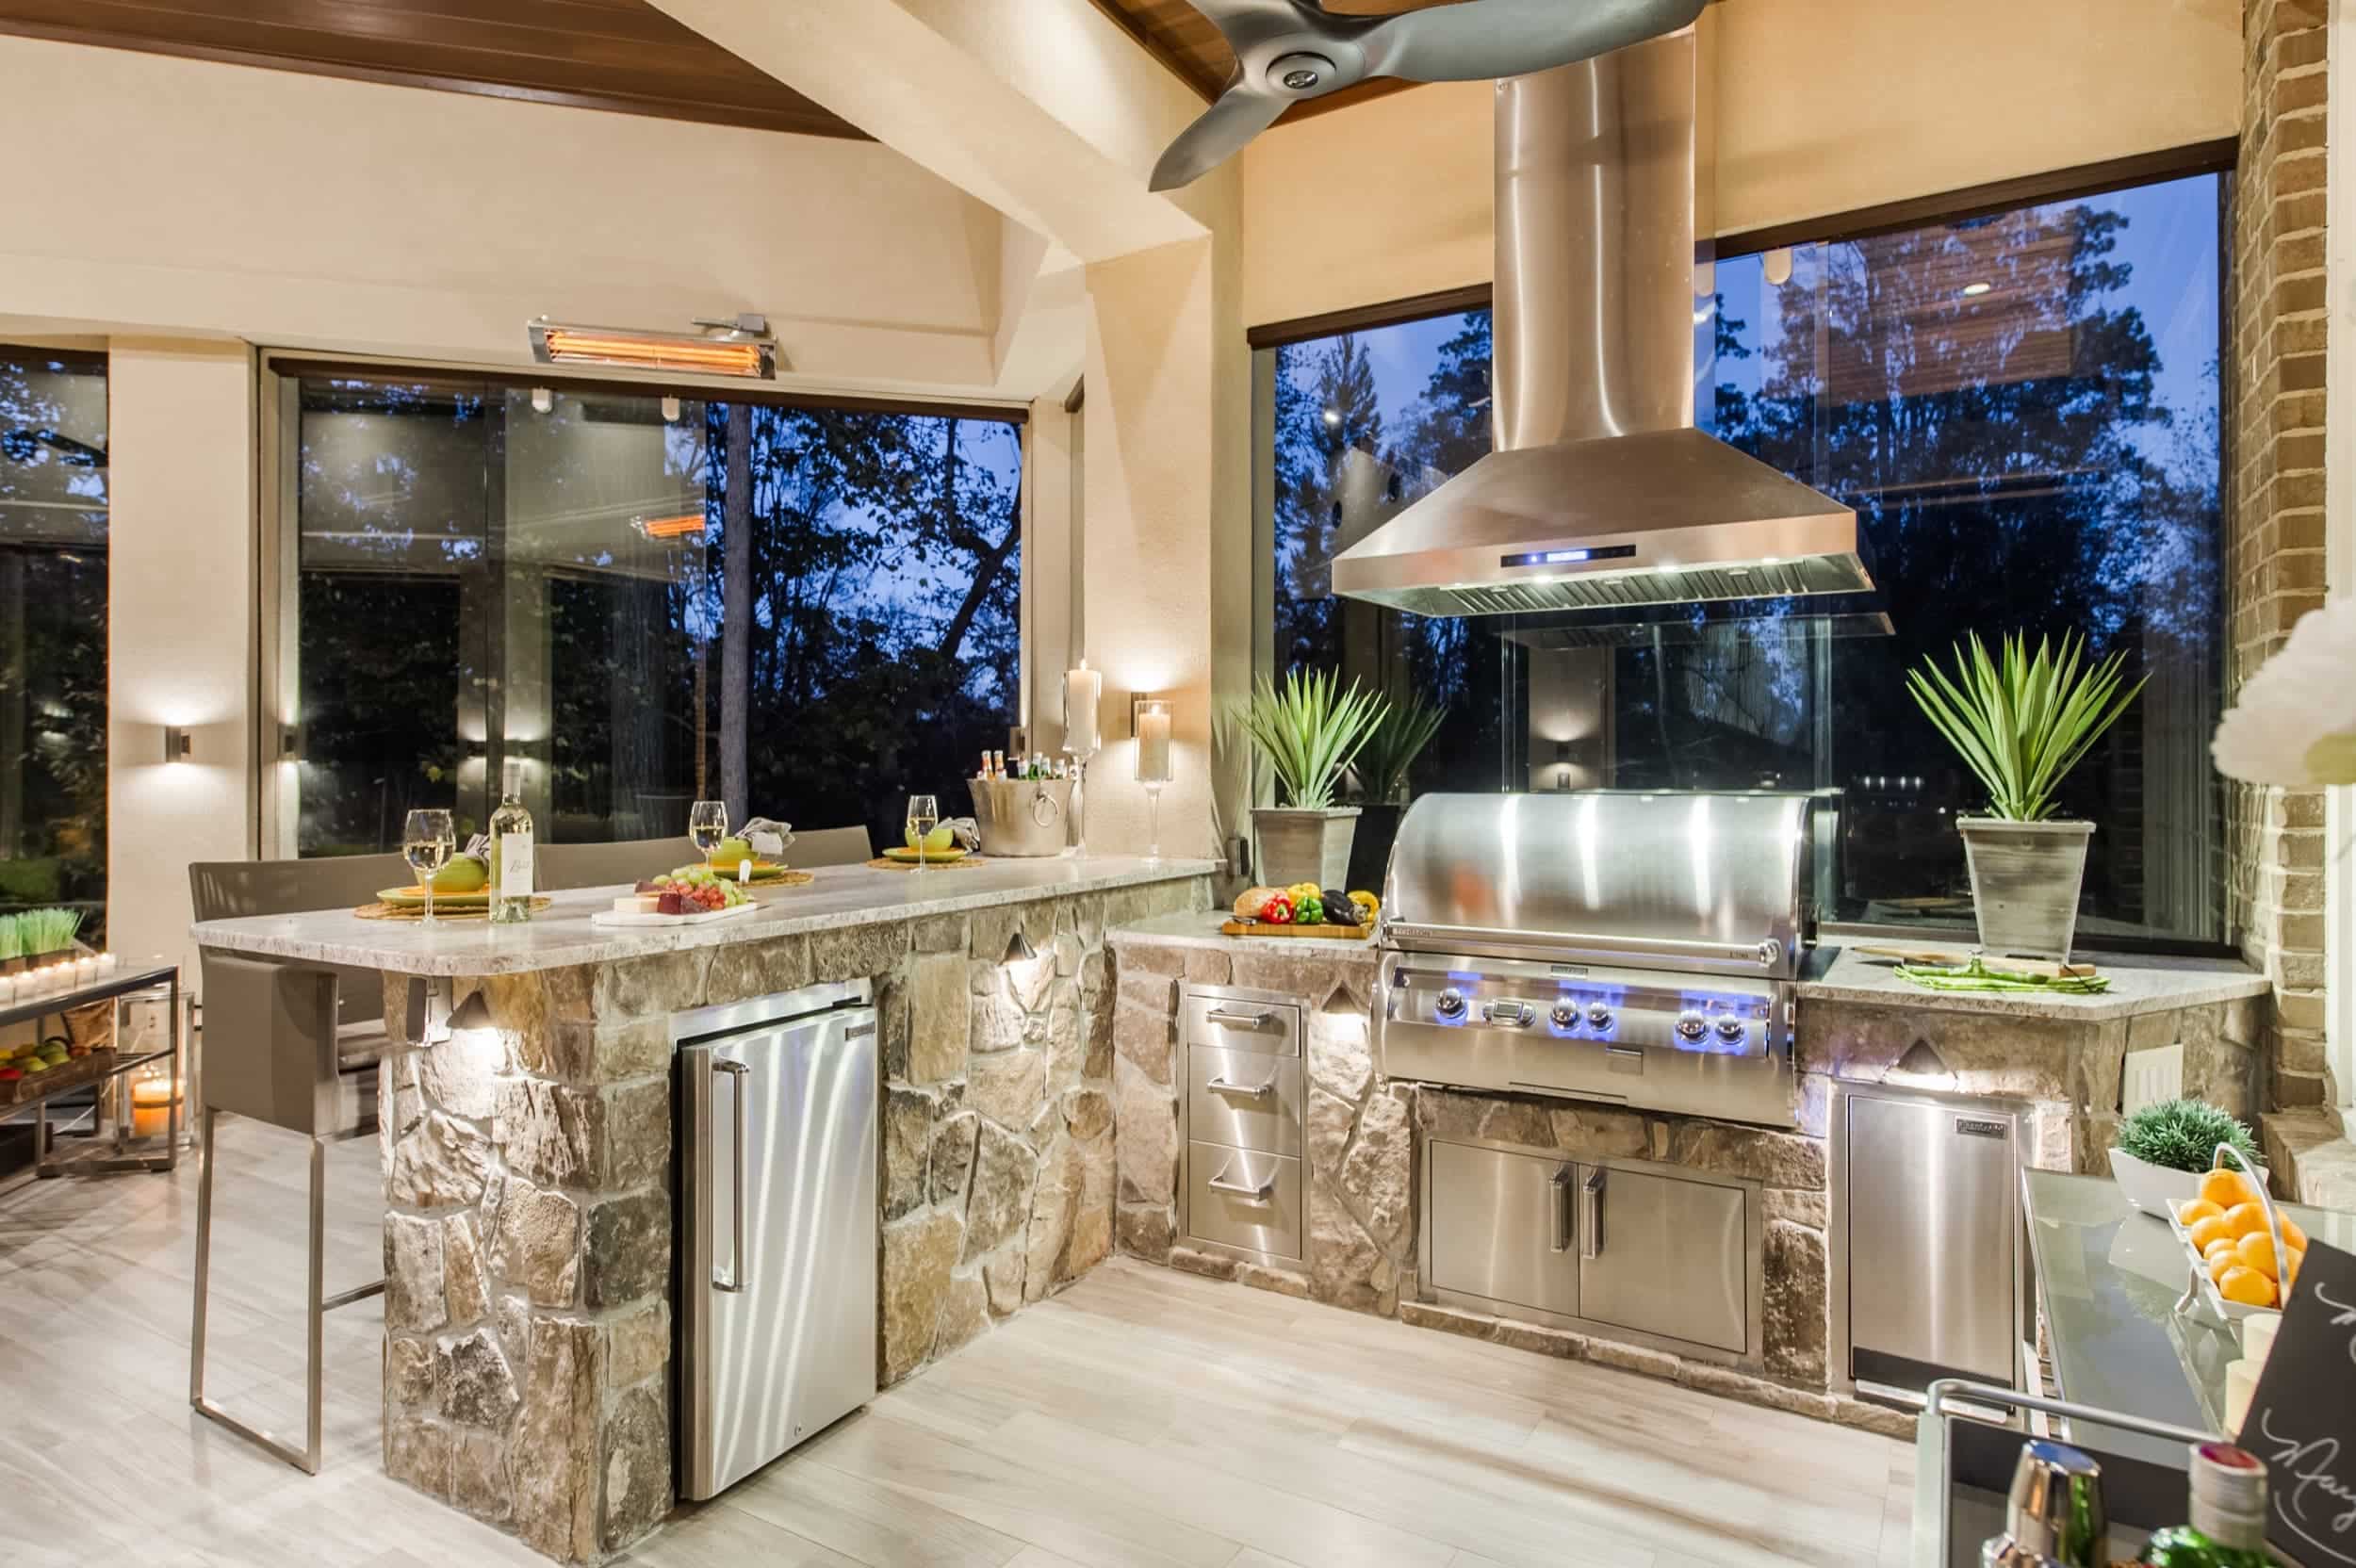 An outdoor kitchen with a grill and sink.